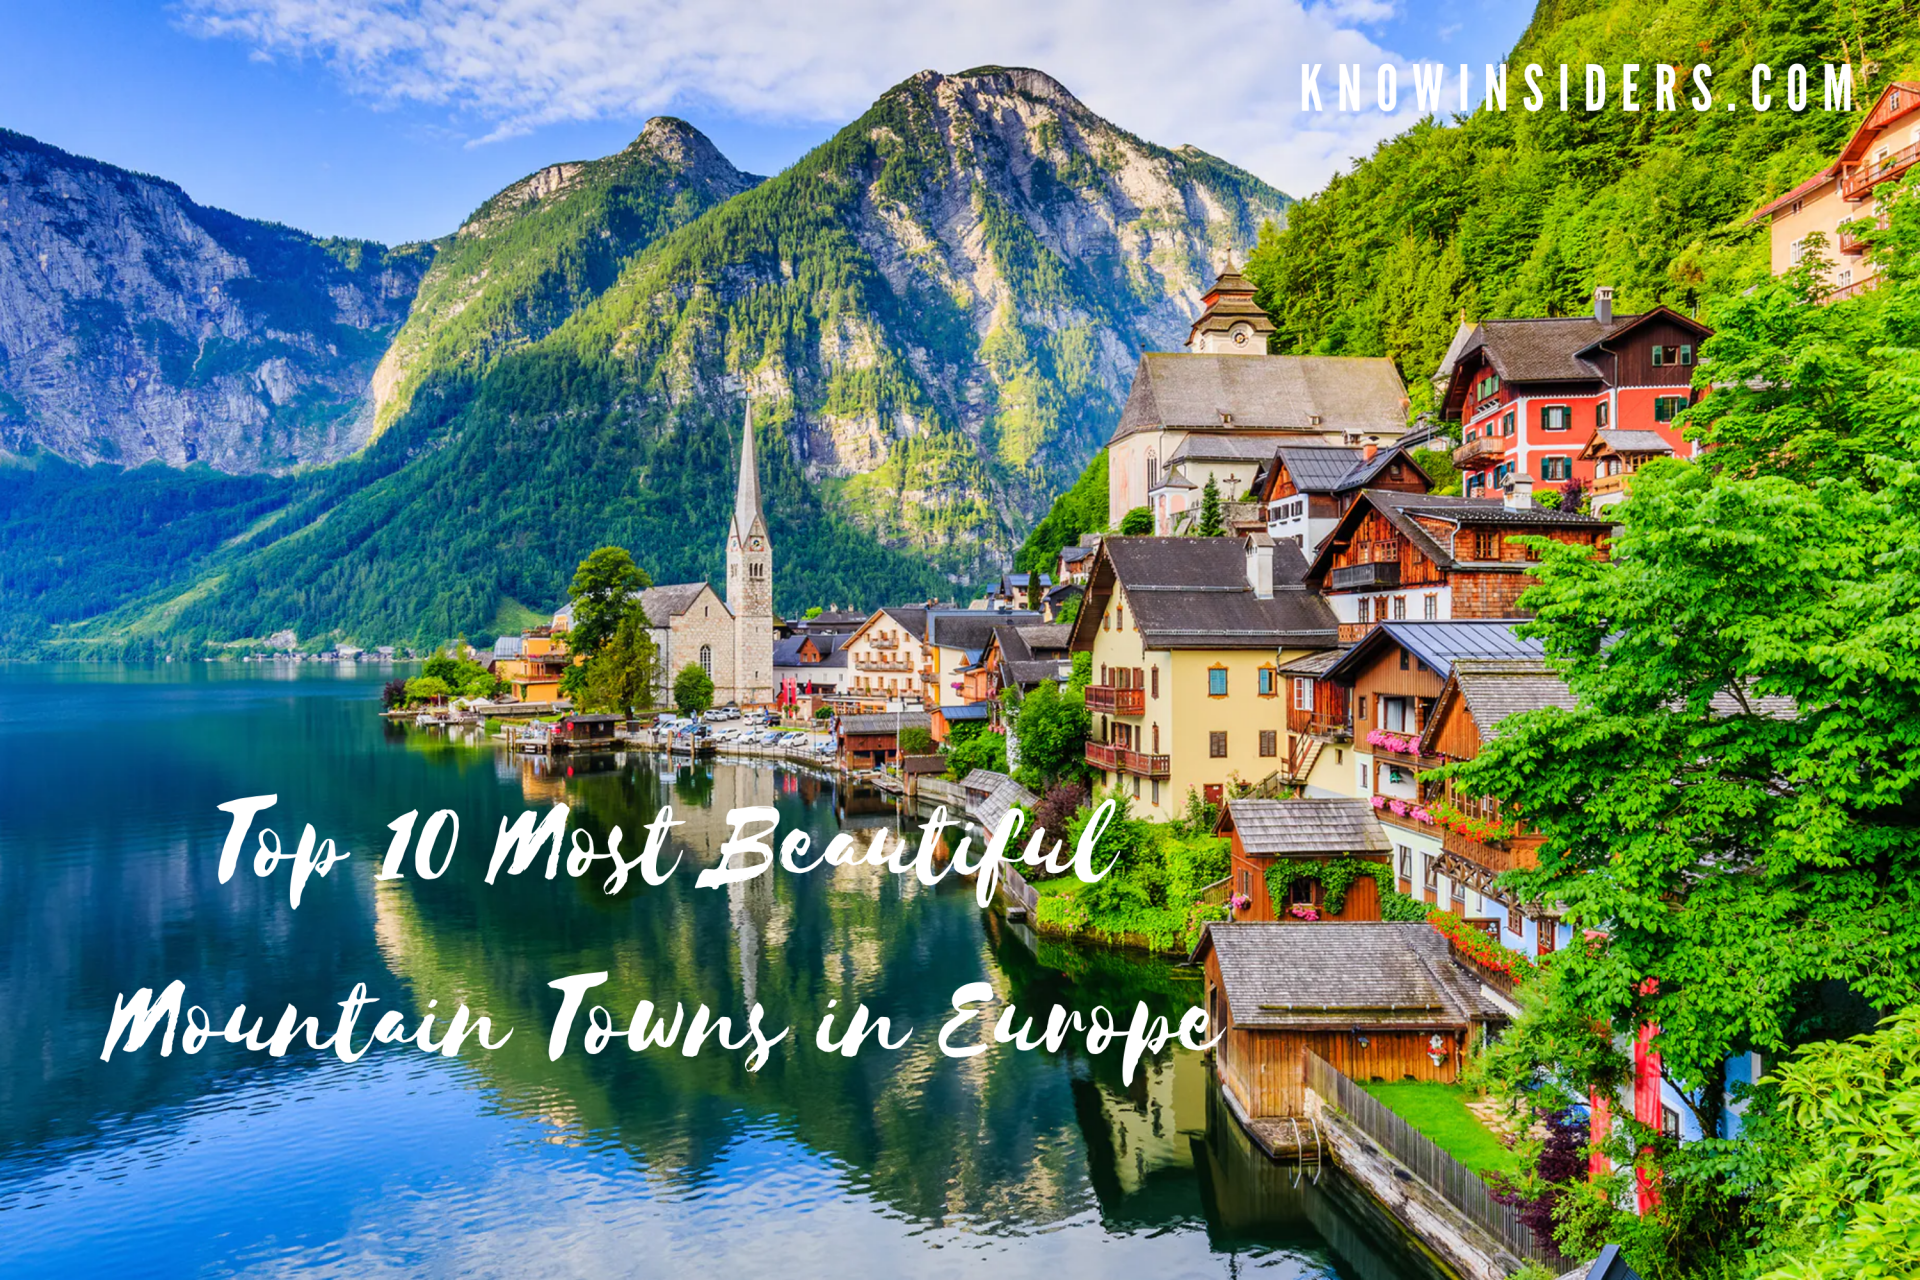 Top 10 Most Beautiful Mountain Towns in Europe